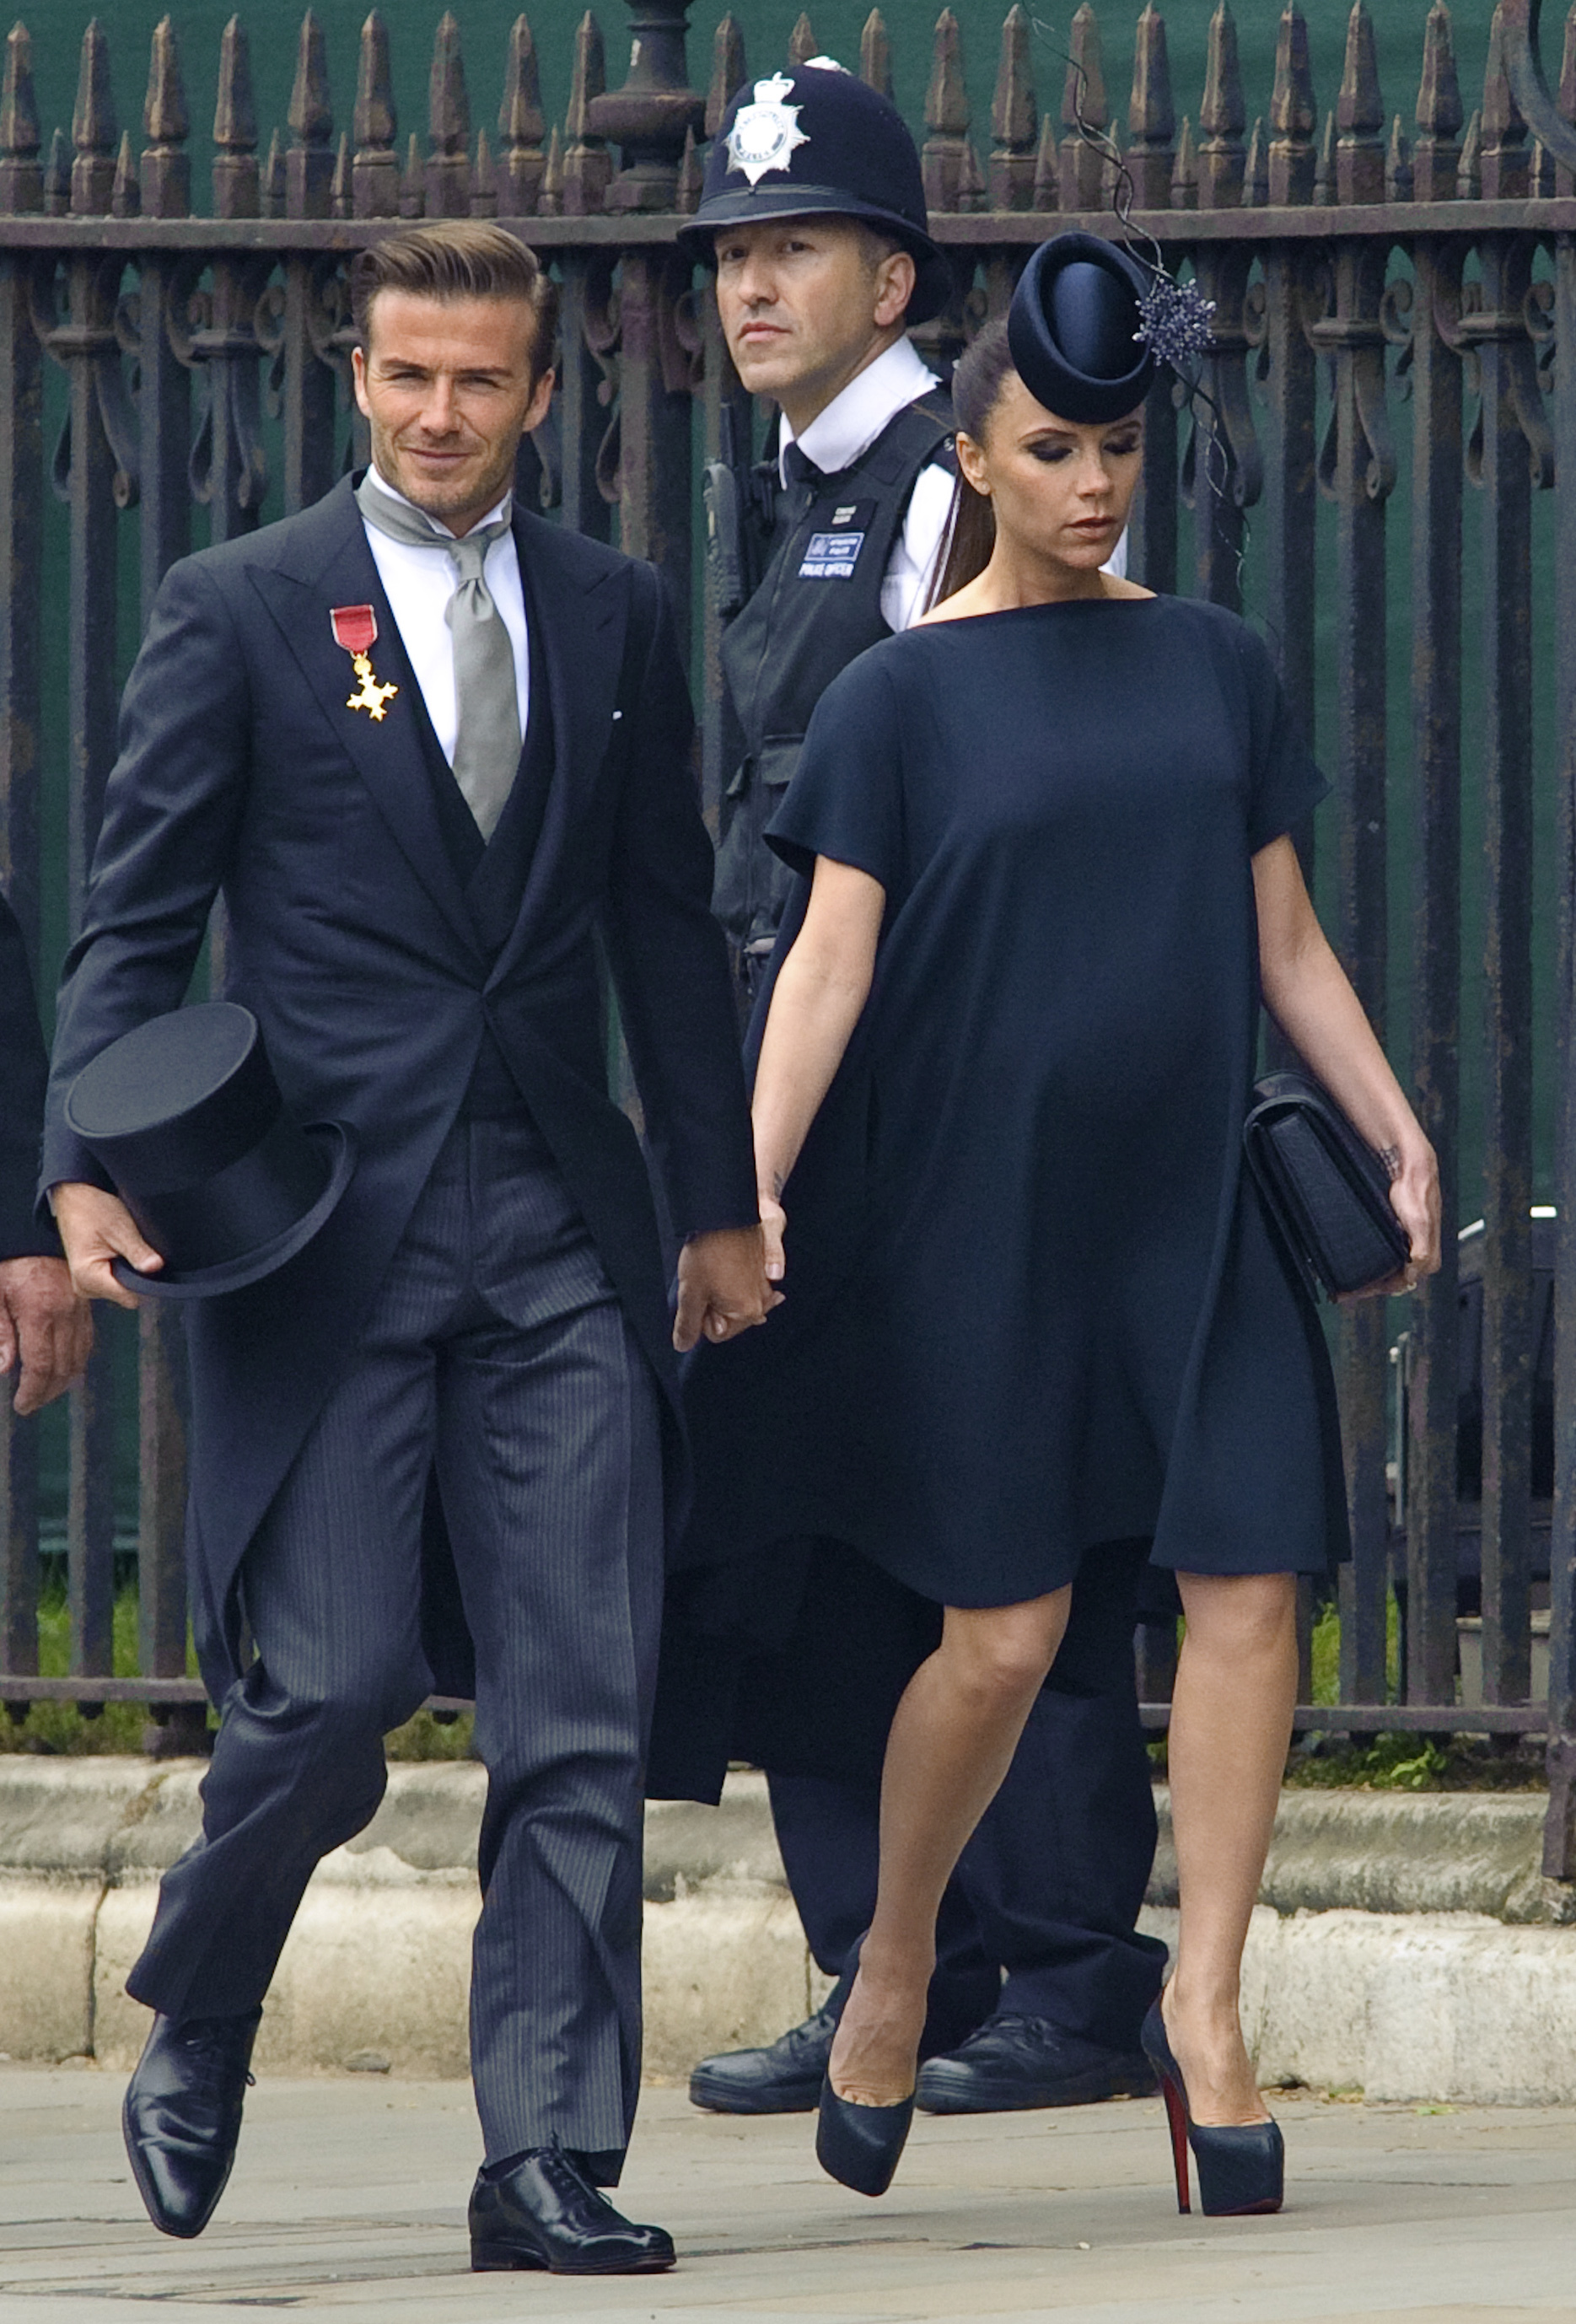 David Beckham and his wife Victoria Beckham arrive at Westminster Abbey for the wedding of Prince William and Kate Middleton